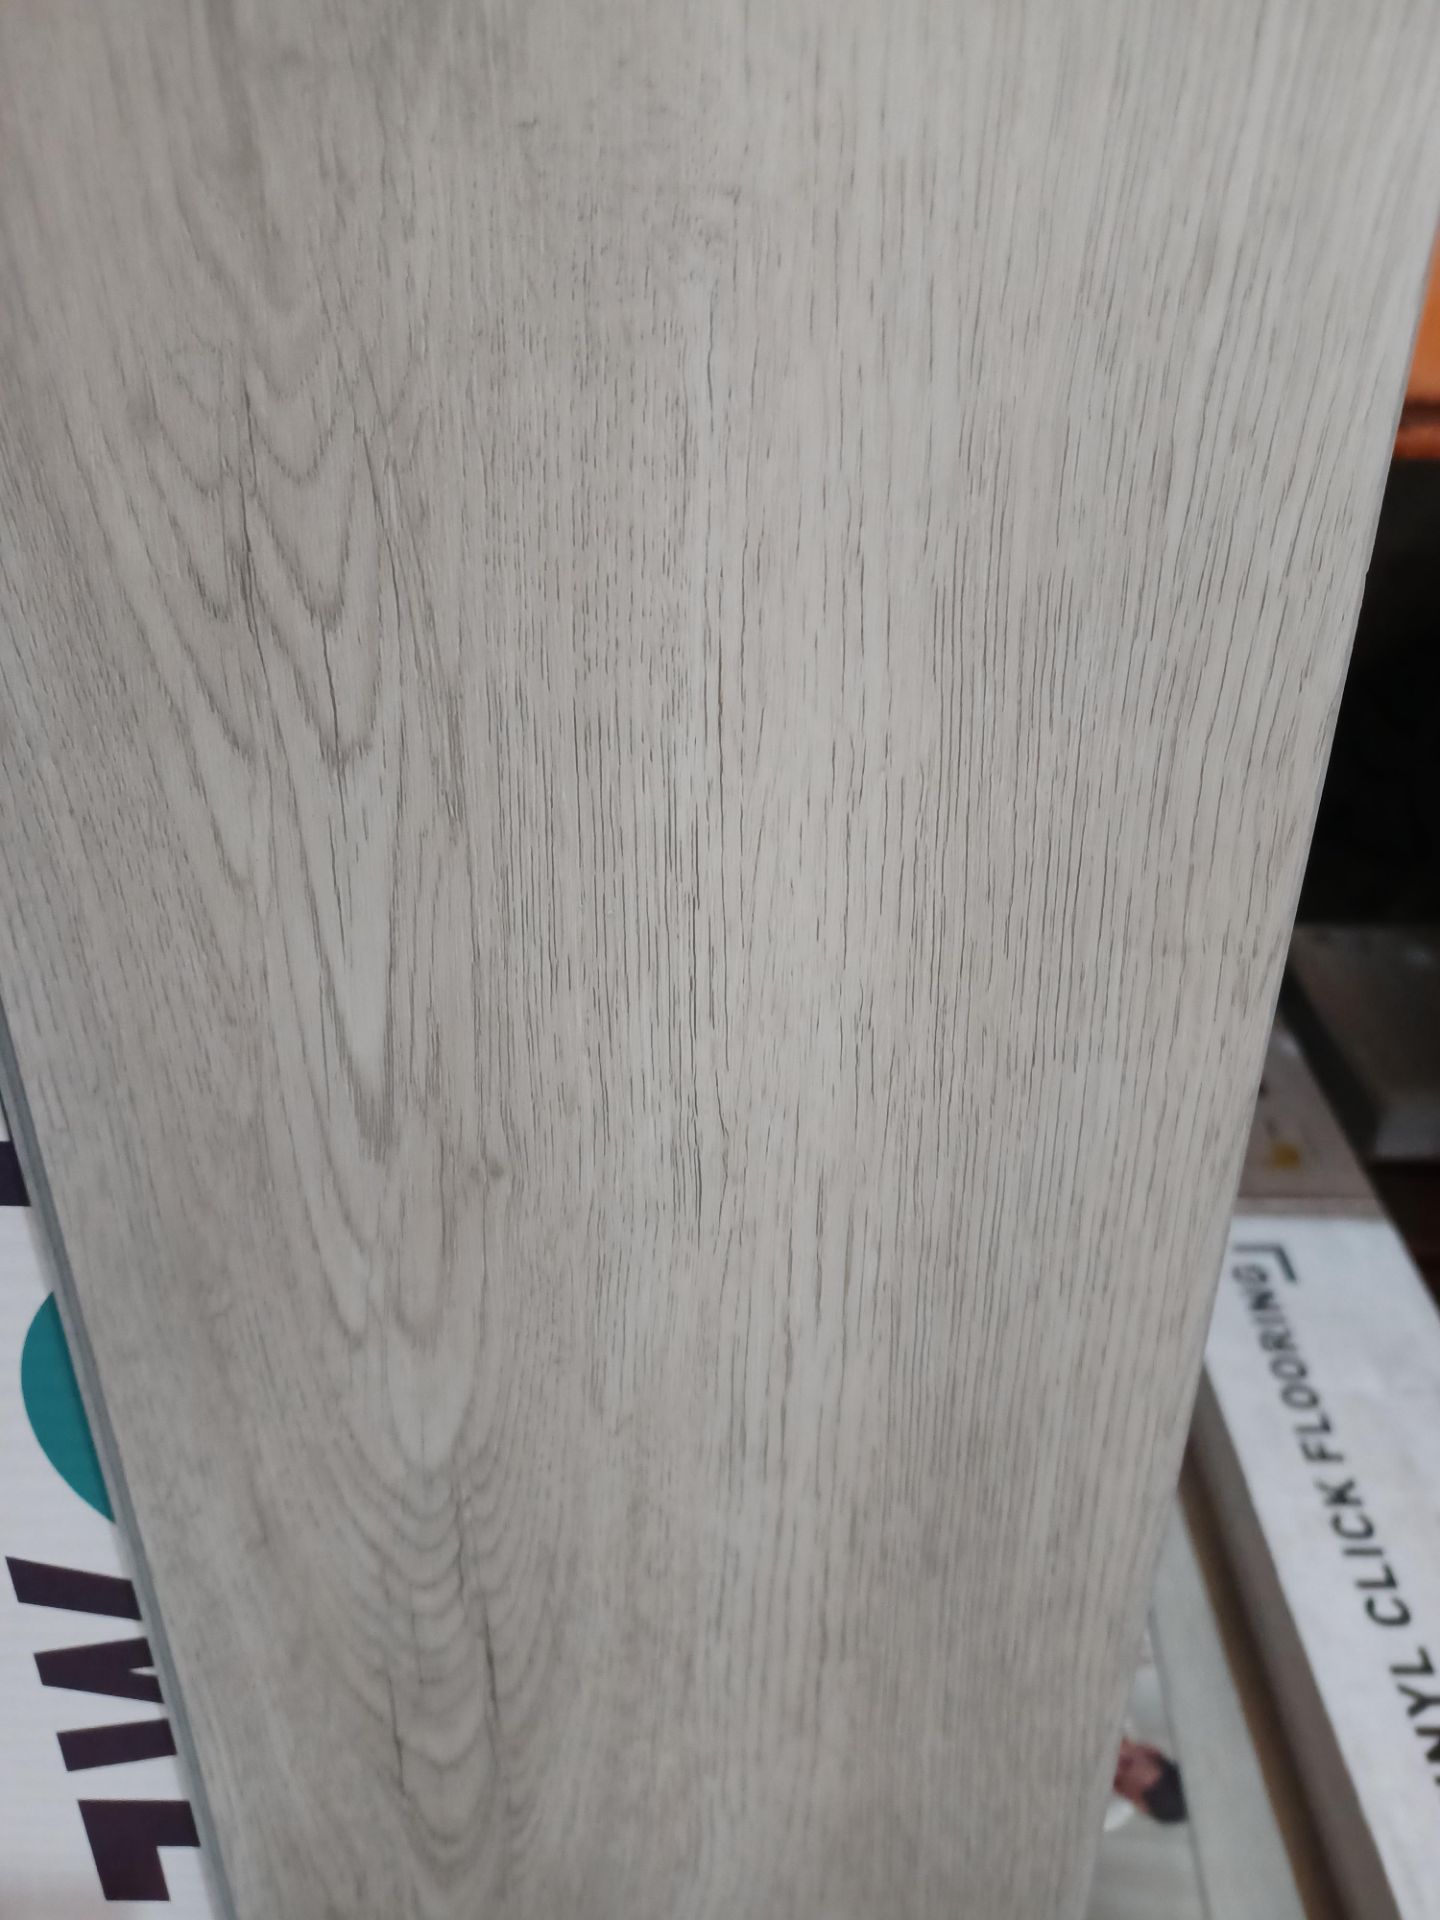 11 x PACKS OF Showhome Grey Wood effect Luxury vinyl click flooring. Each pack contains 2.858m2, - Image 2 of 2